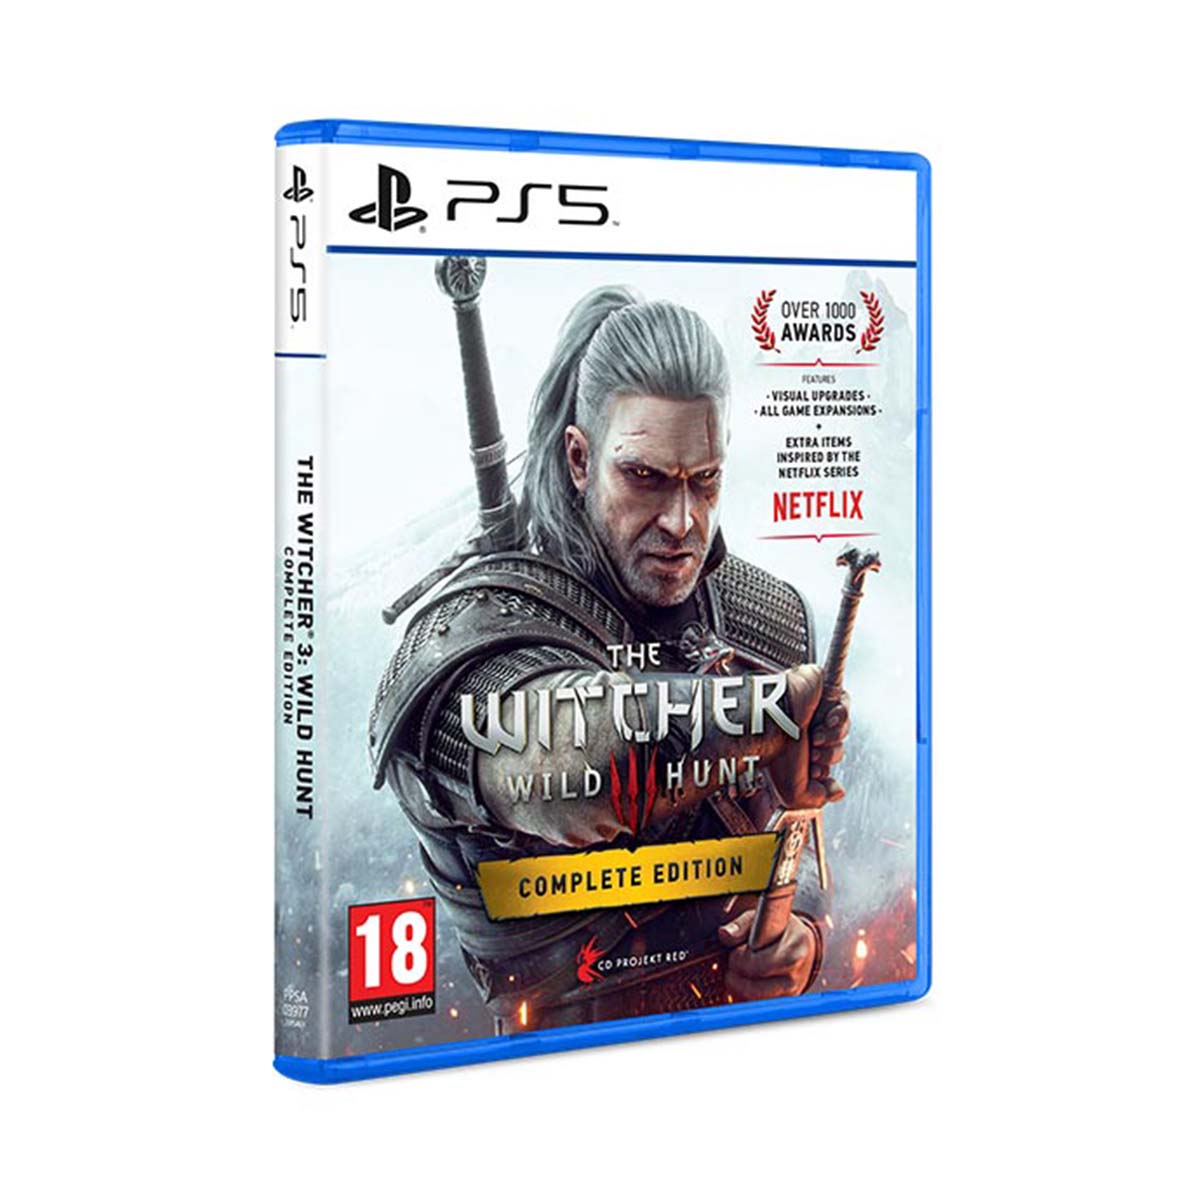 New The Witcher 3: Wild Hunt (Free PS5 Upgrade) at Rs 1530 in